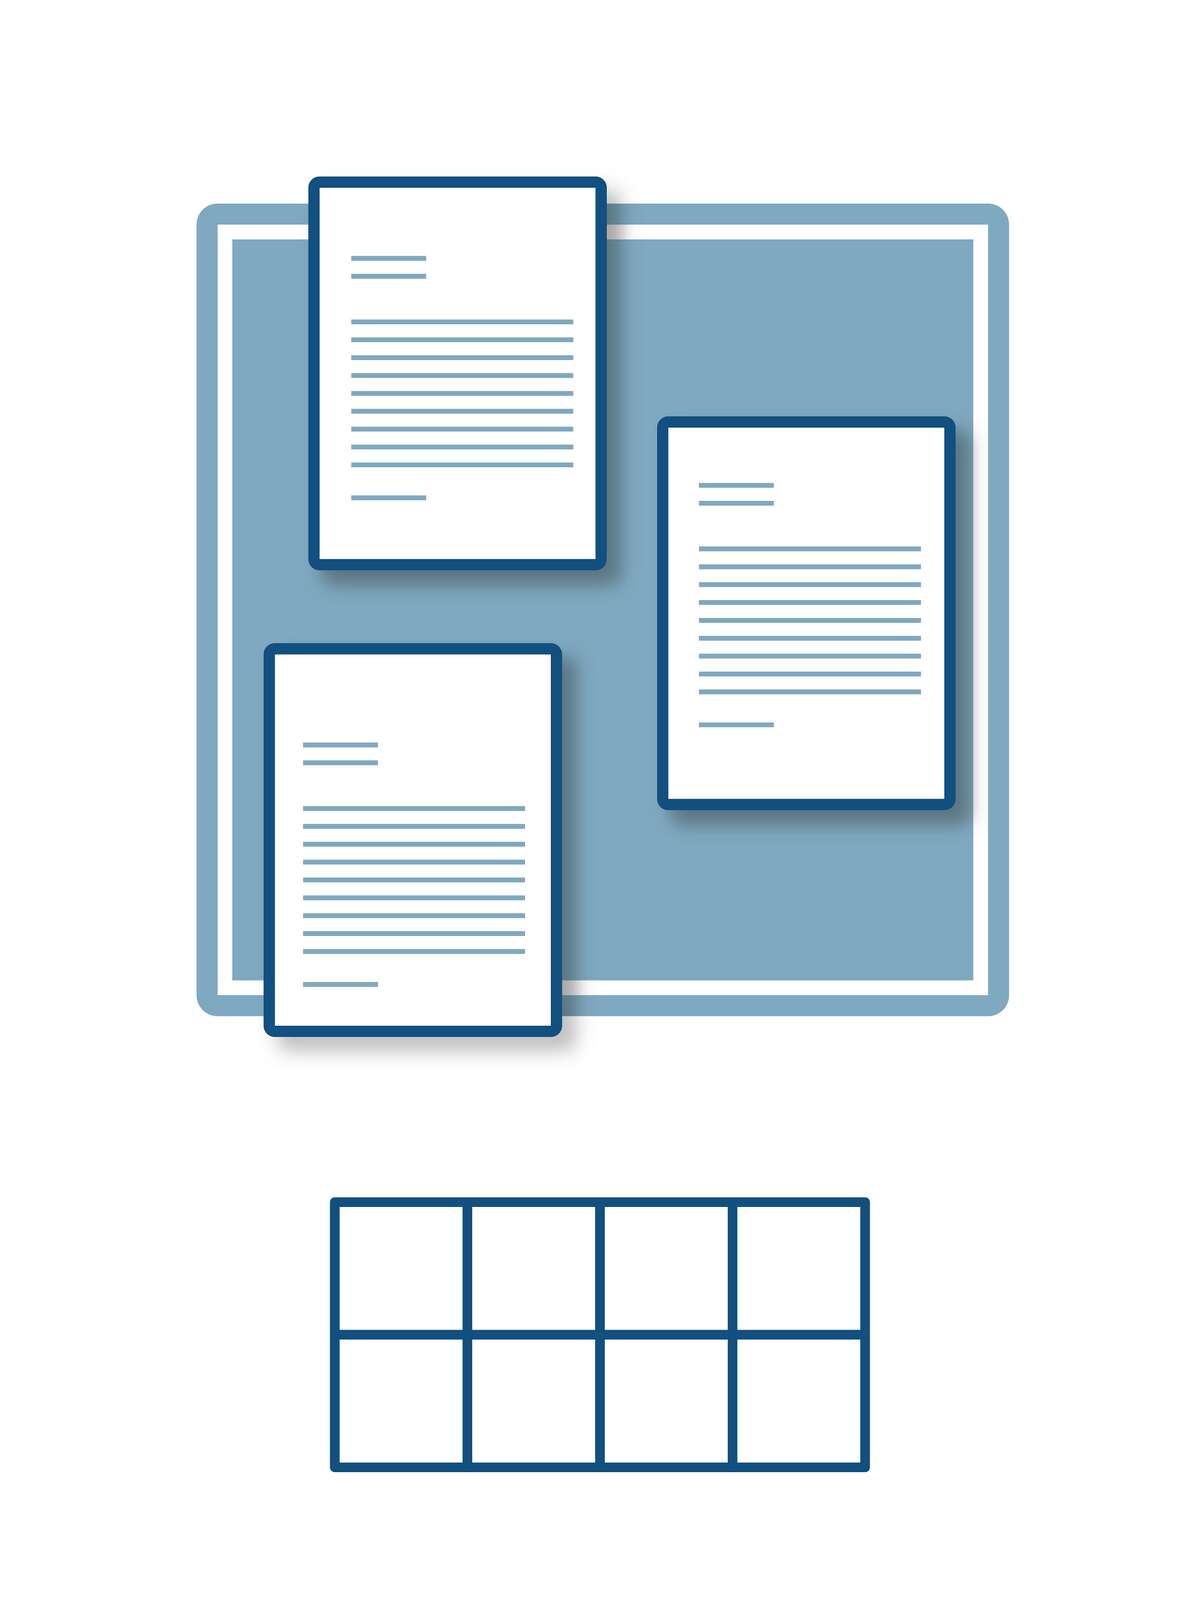 Illustration highlighting the second type of process, papers with words and specialized skill icons, added box below